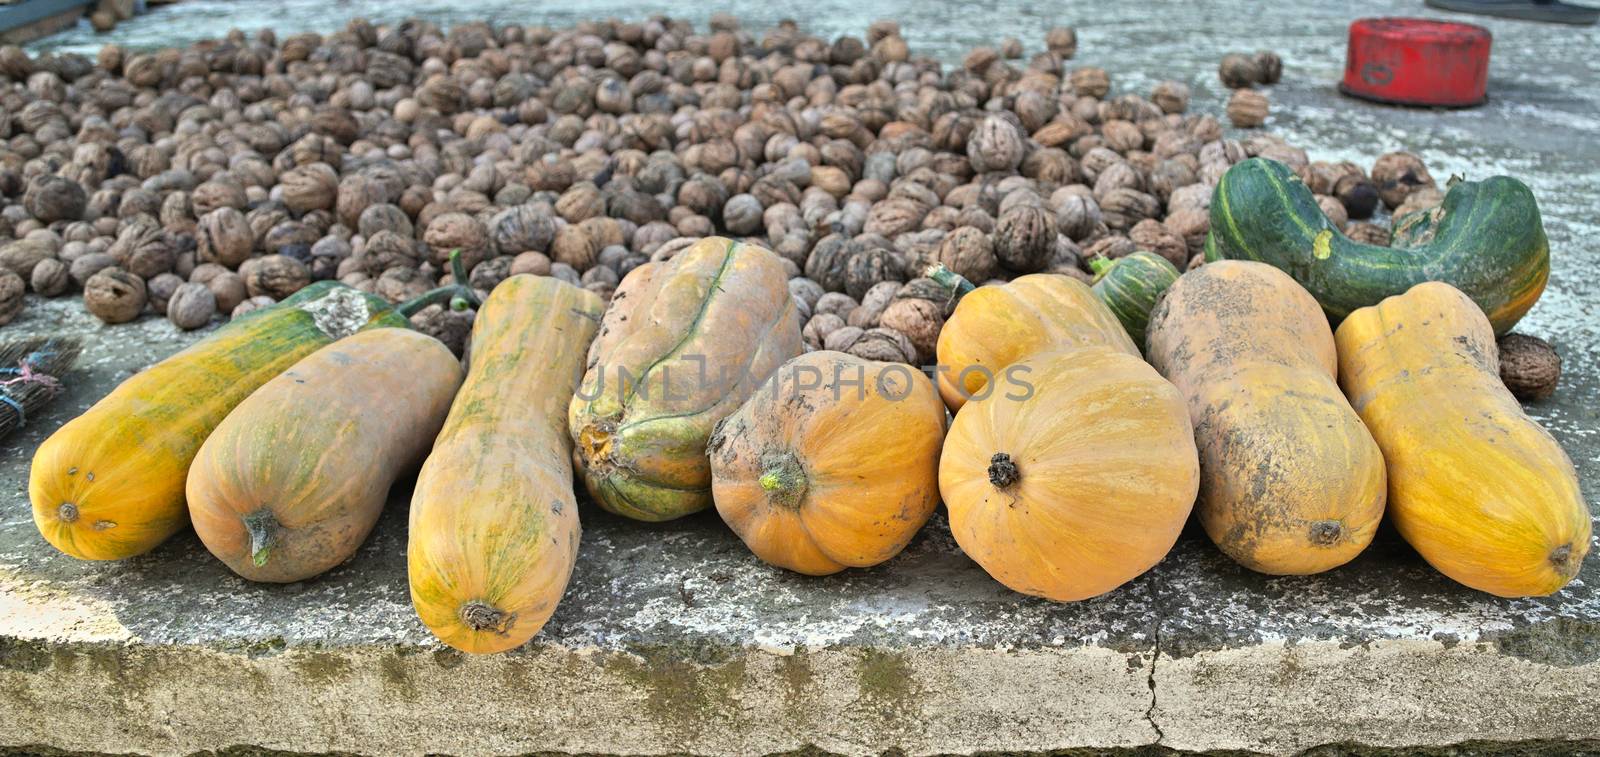 Autumn harvest of pumpkins and walnuts by sheriffkule